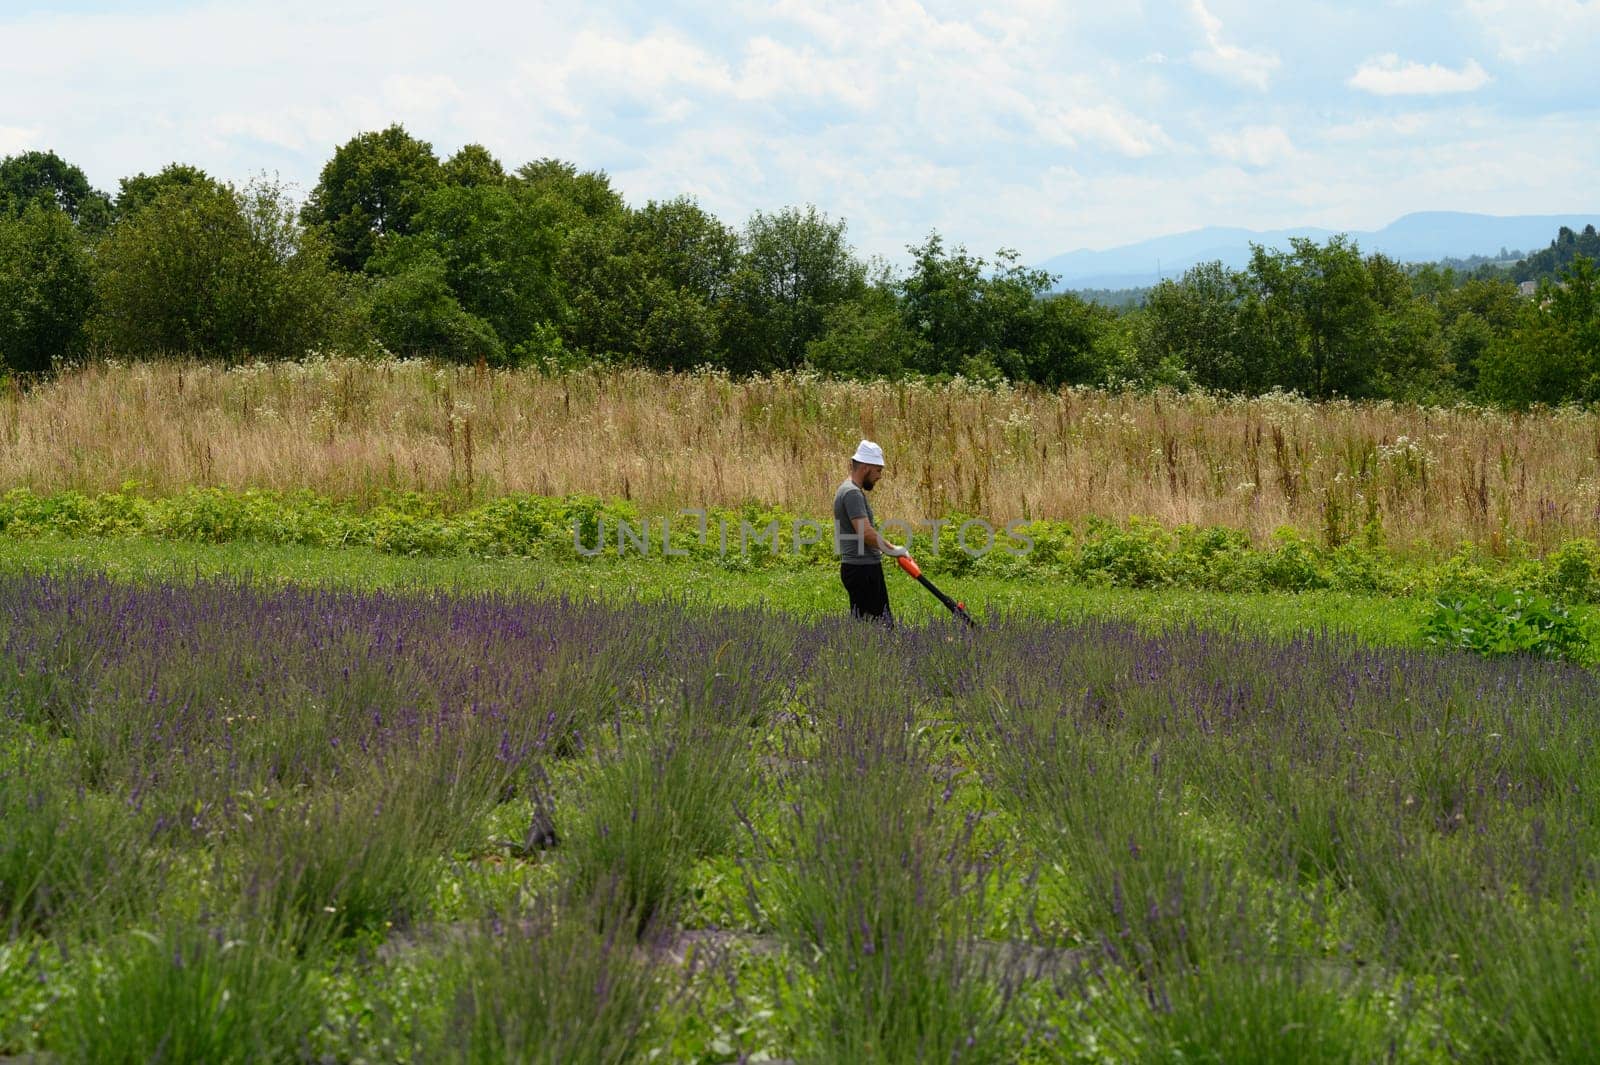 Caring for a lavender field, a man mows the grass with an electric lawnmower. by Niko_Cingaryuk